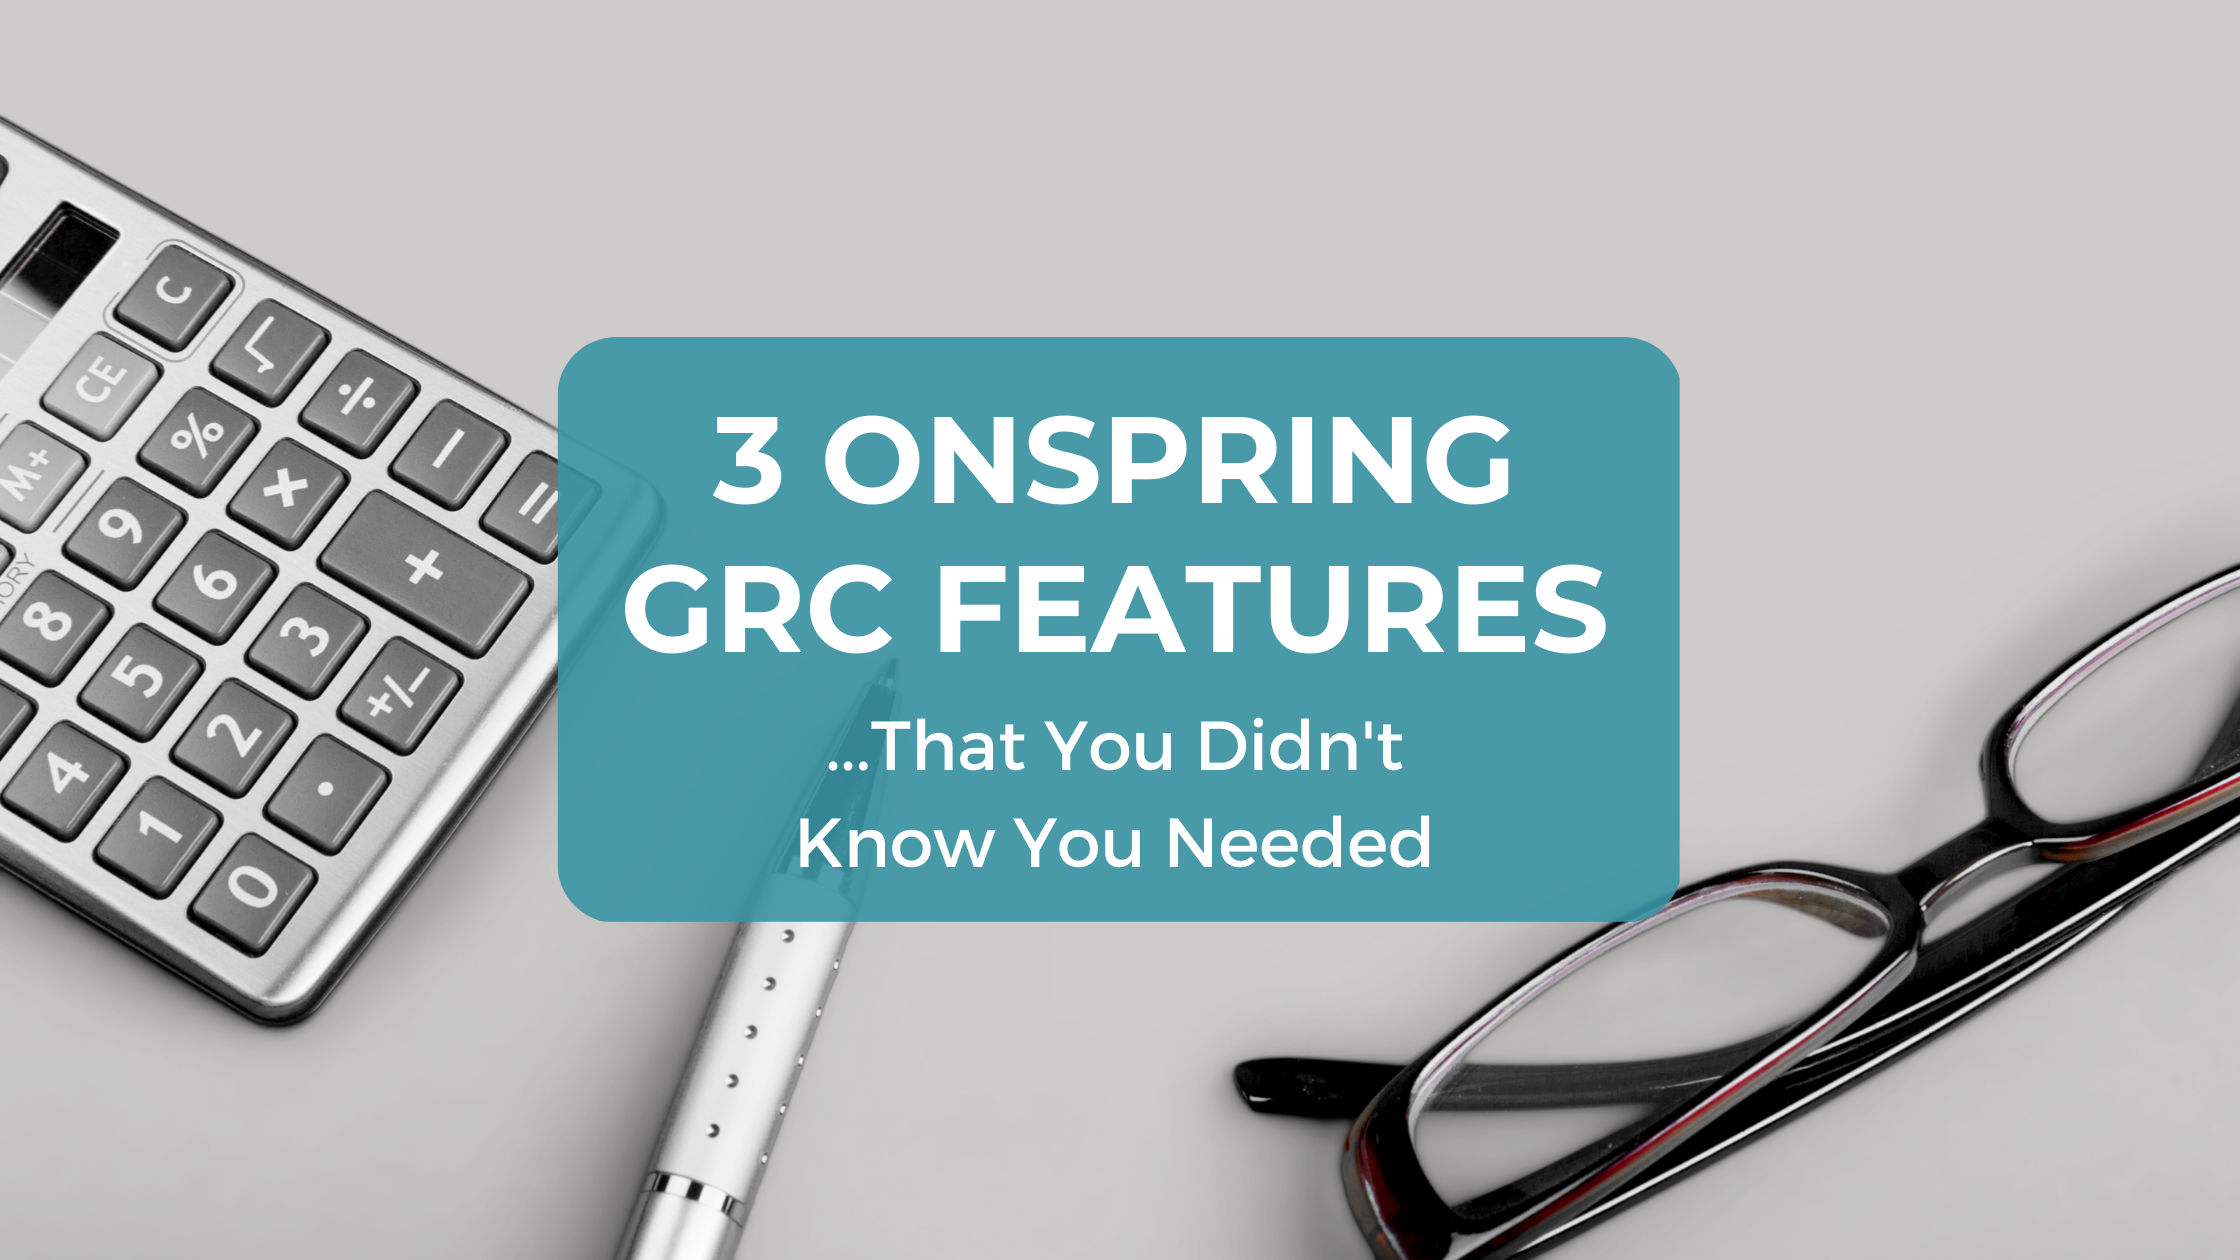 3 Onspring GRC Platform Features That You Didn't Know You Needed